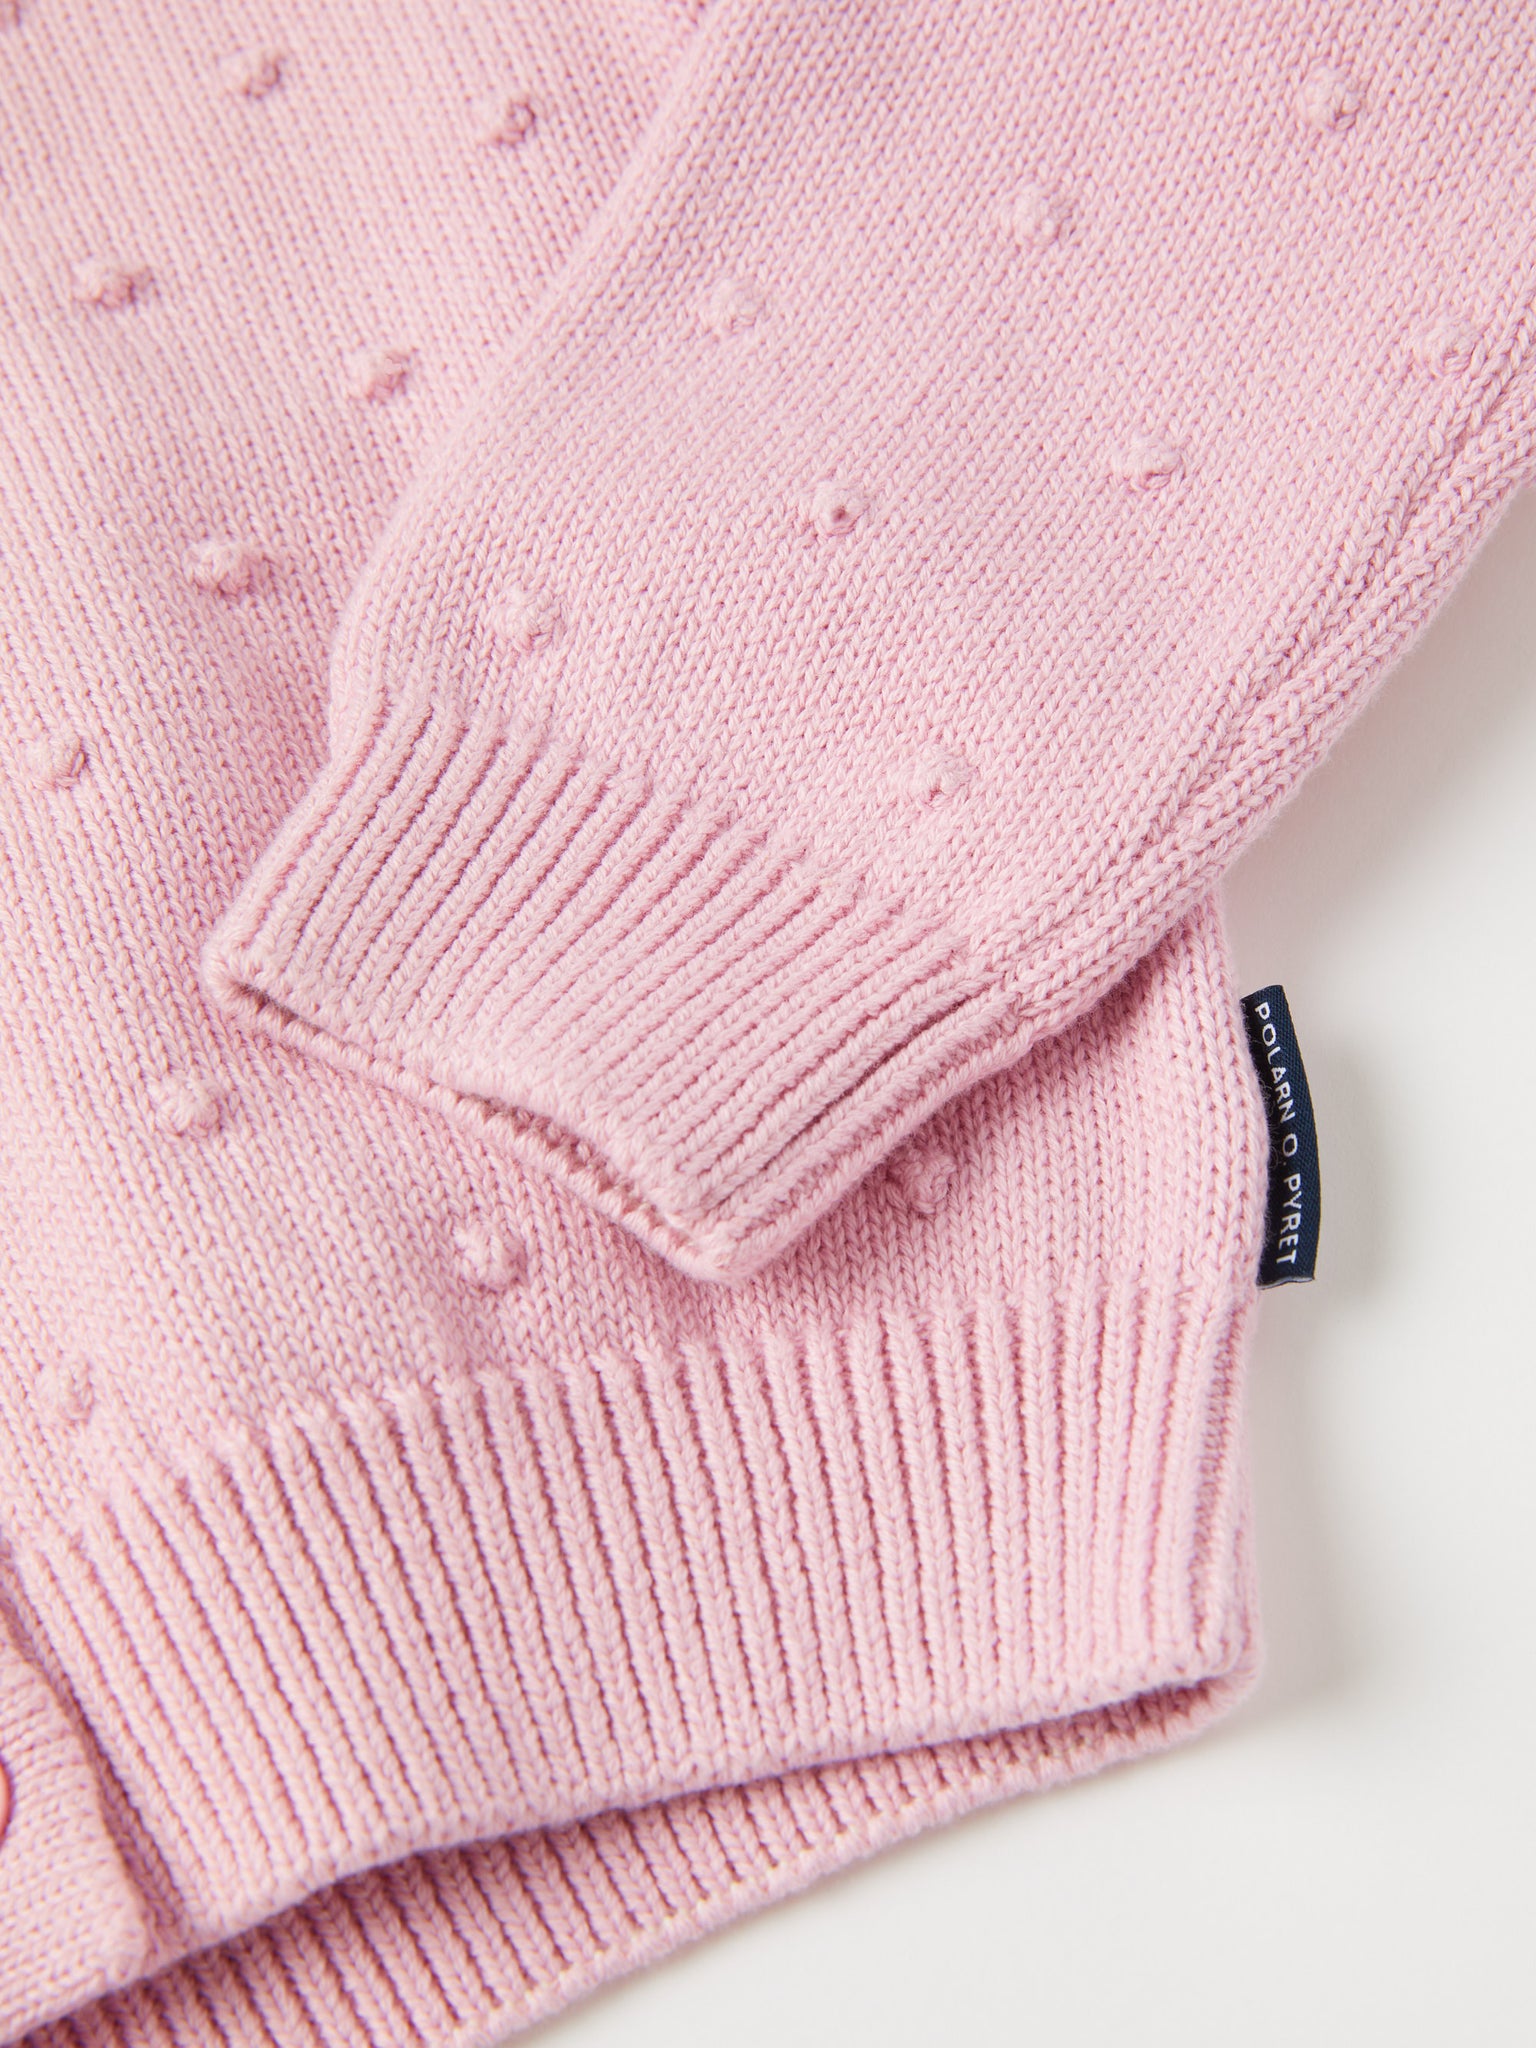 Pink Kids Knitted Cardigan from the Polarn O. Pyret kidswear collection. Clothes made using sustainably sourced materials.